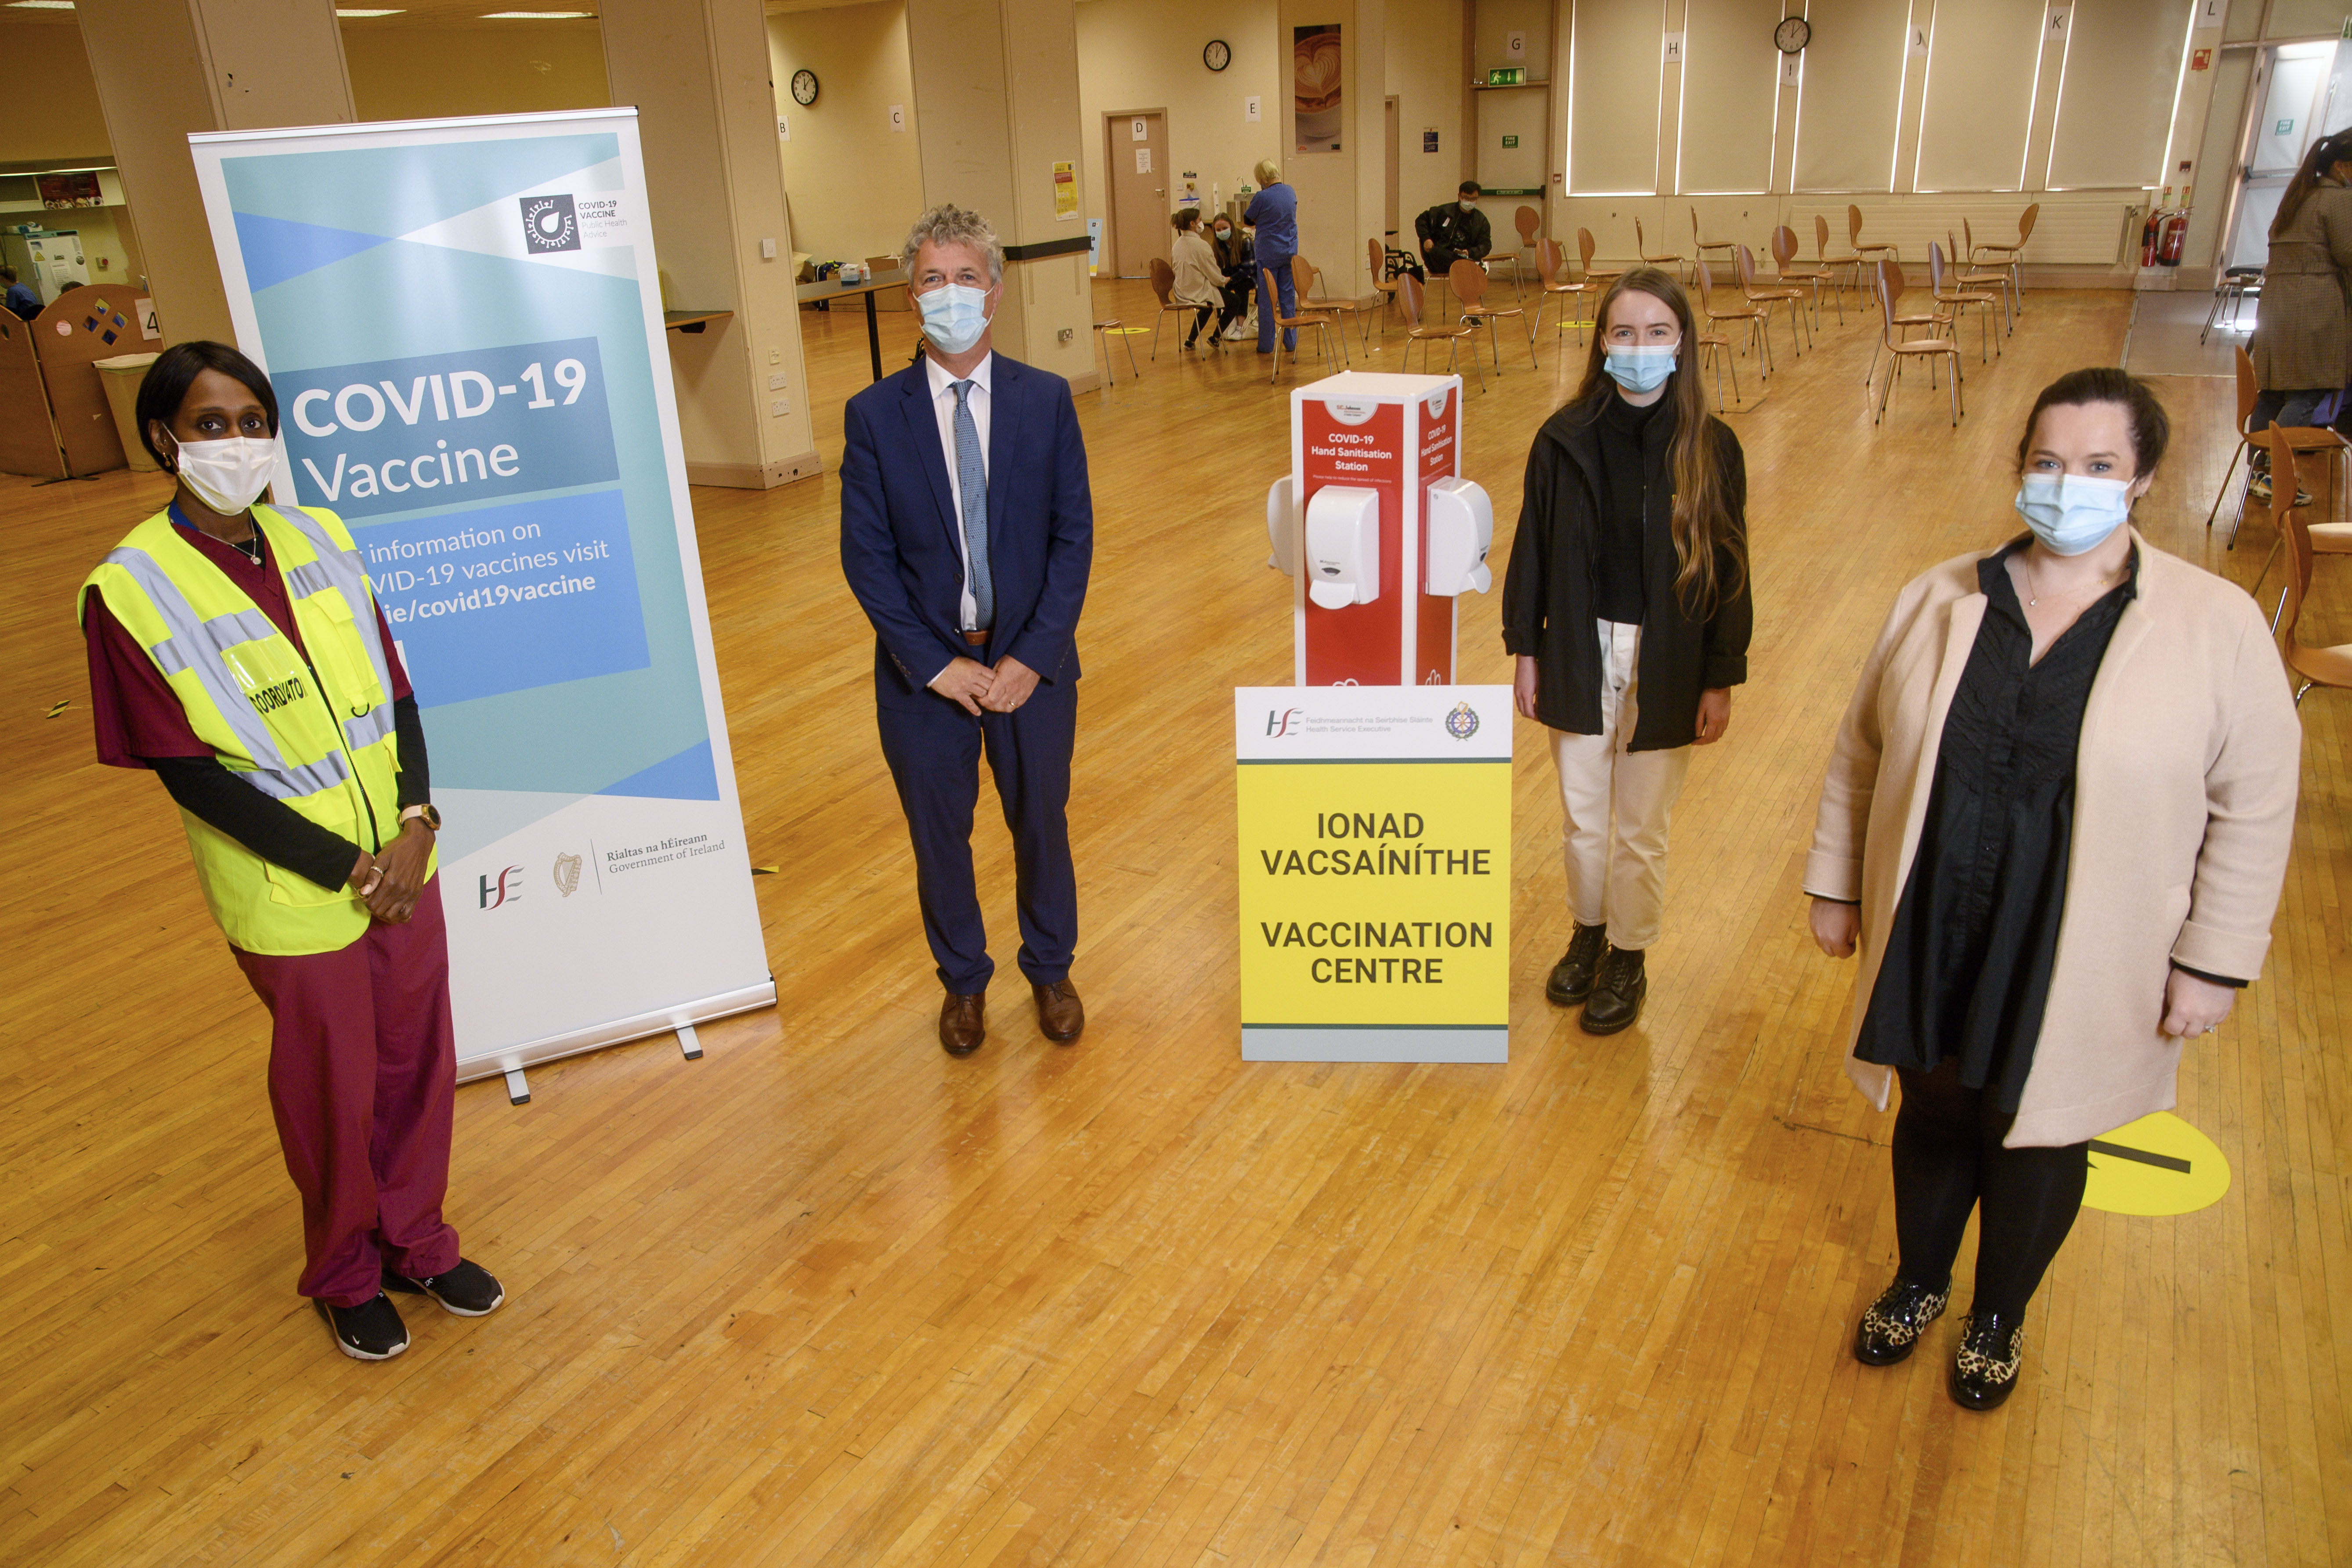 Pop-Up COVID-19 Vaccination Clinic on Campus